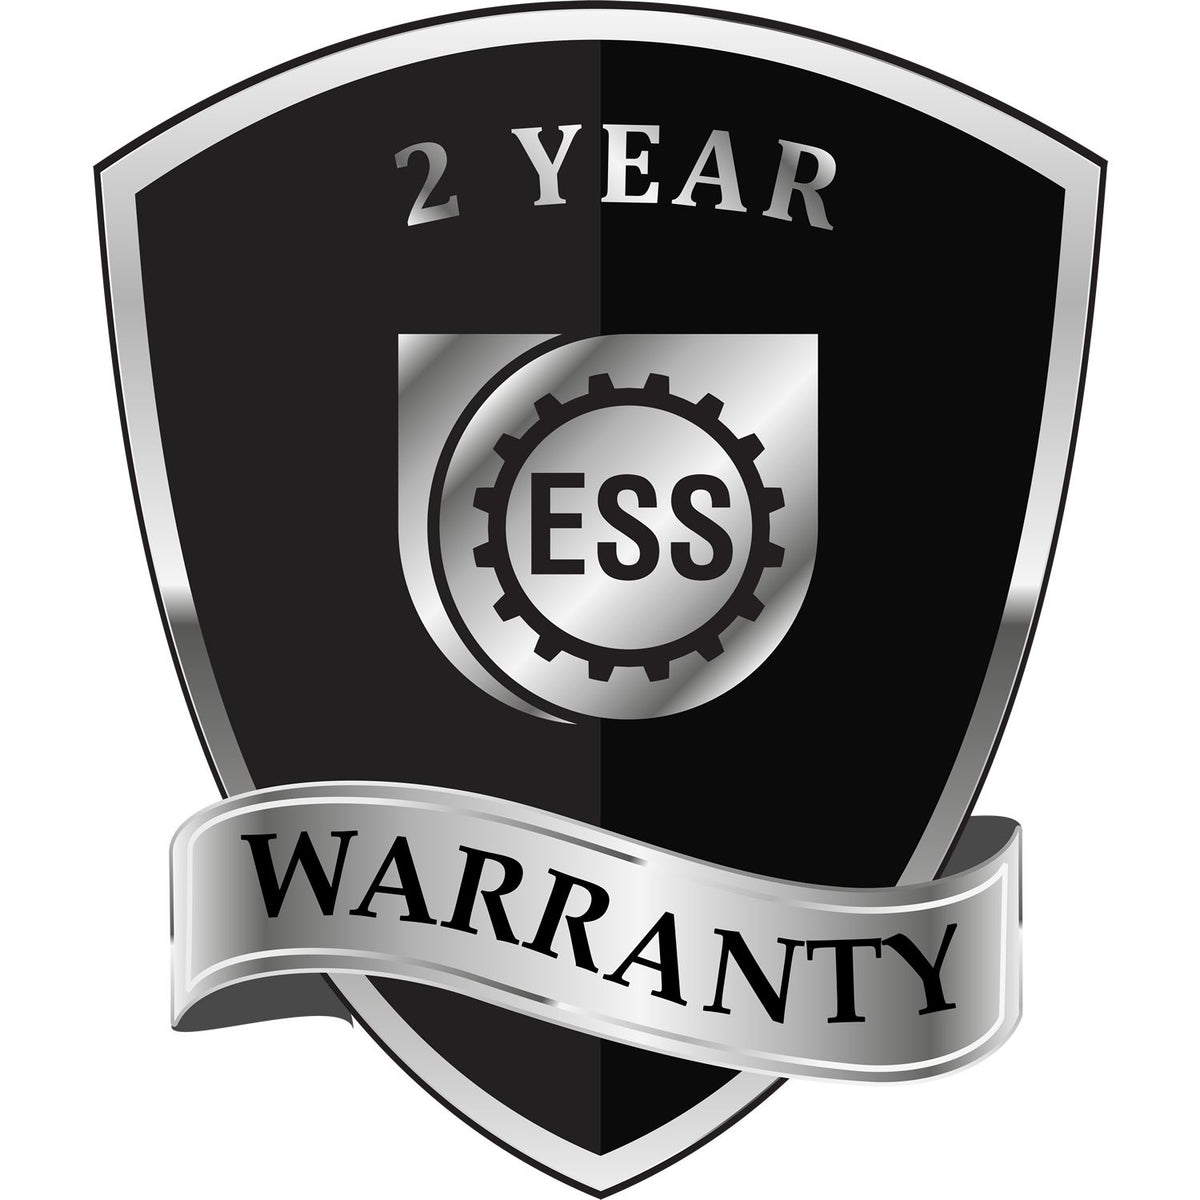 A badge or emblem showing a warranty icon for the Extended Long Reach Kentucky Architect Seal Embosser